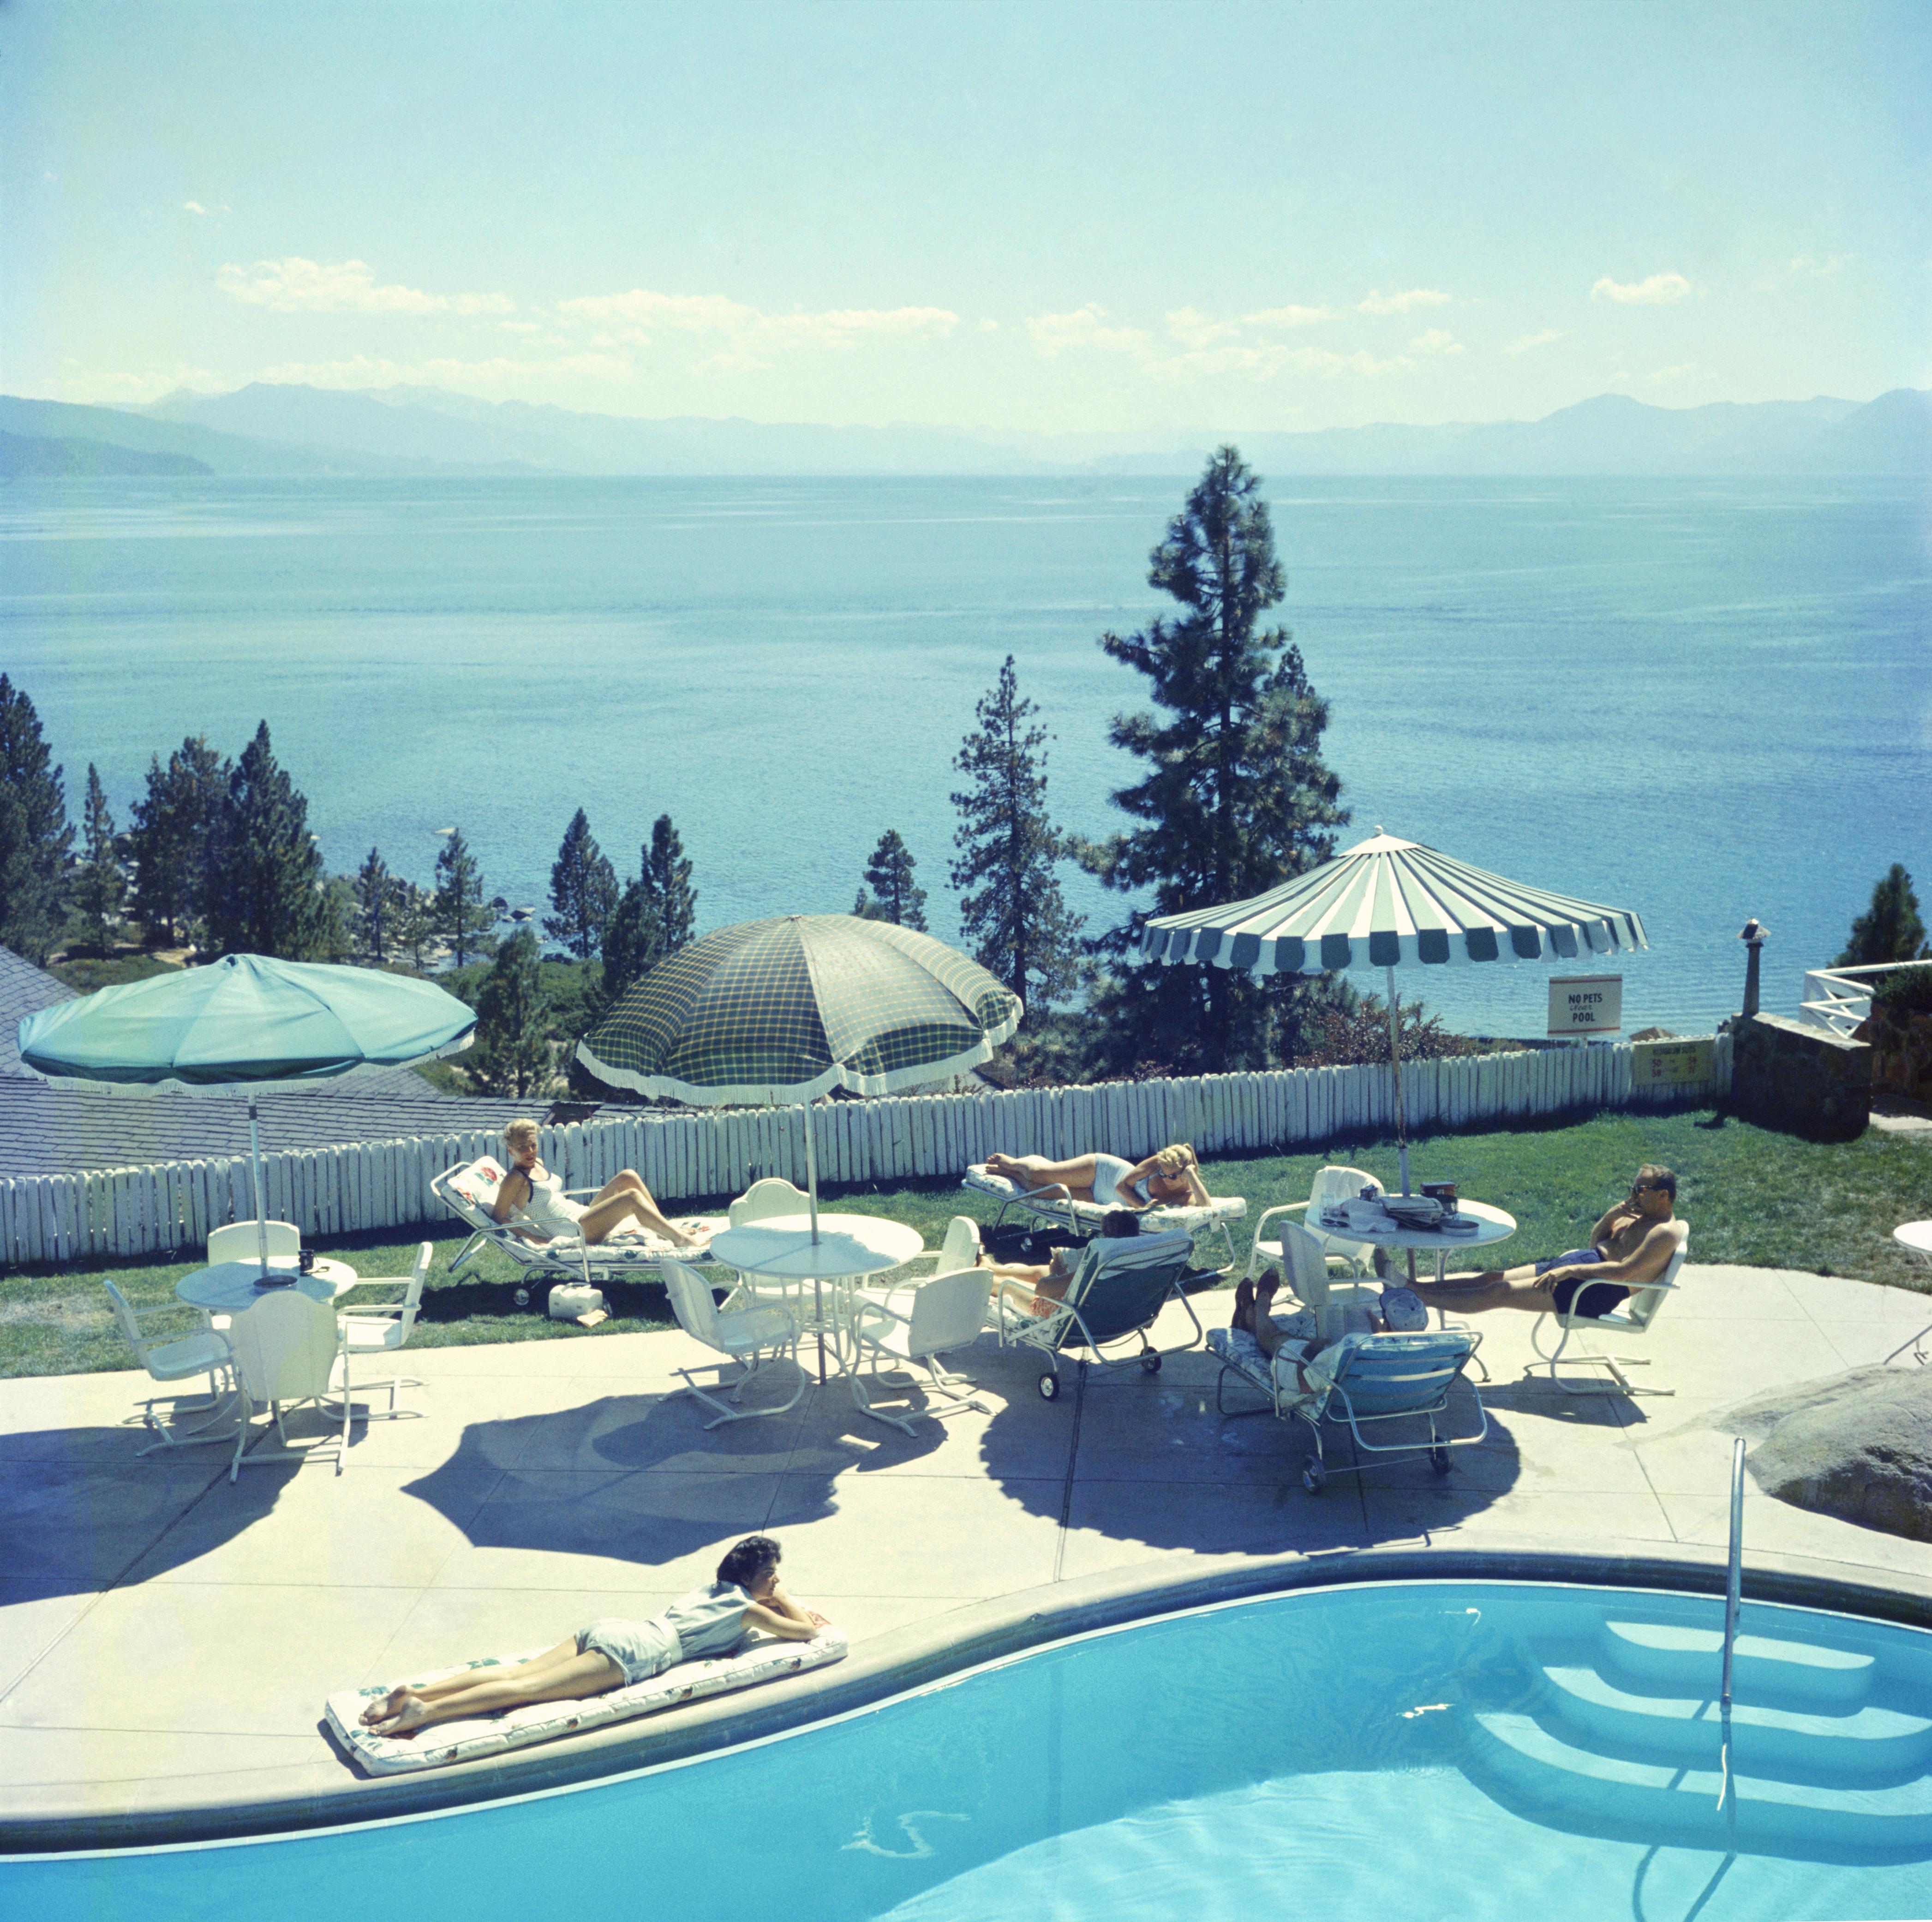 'Relaxing At Lake Tahoe' 1959 Slim Aarons Limited Estate Edition

A group of people relaxing by a pool near Lake Tahoe, California, 1959. 

Produced from the original transparency
Certificate of authenticity supplied 
30x30 inches / 76 x 76 cm paper